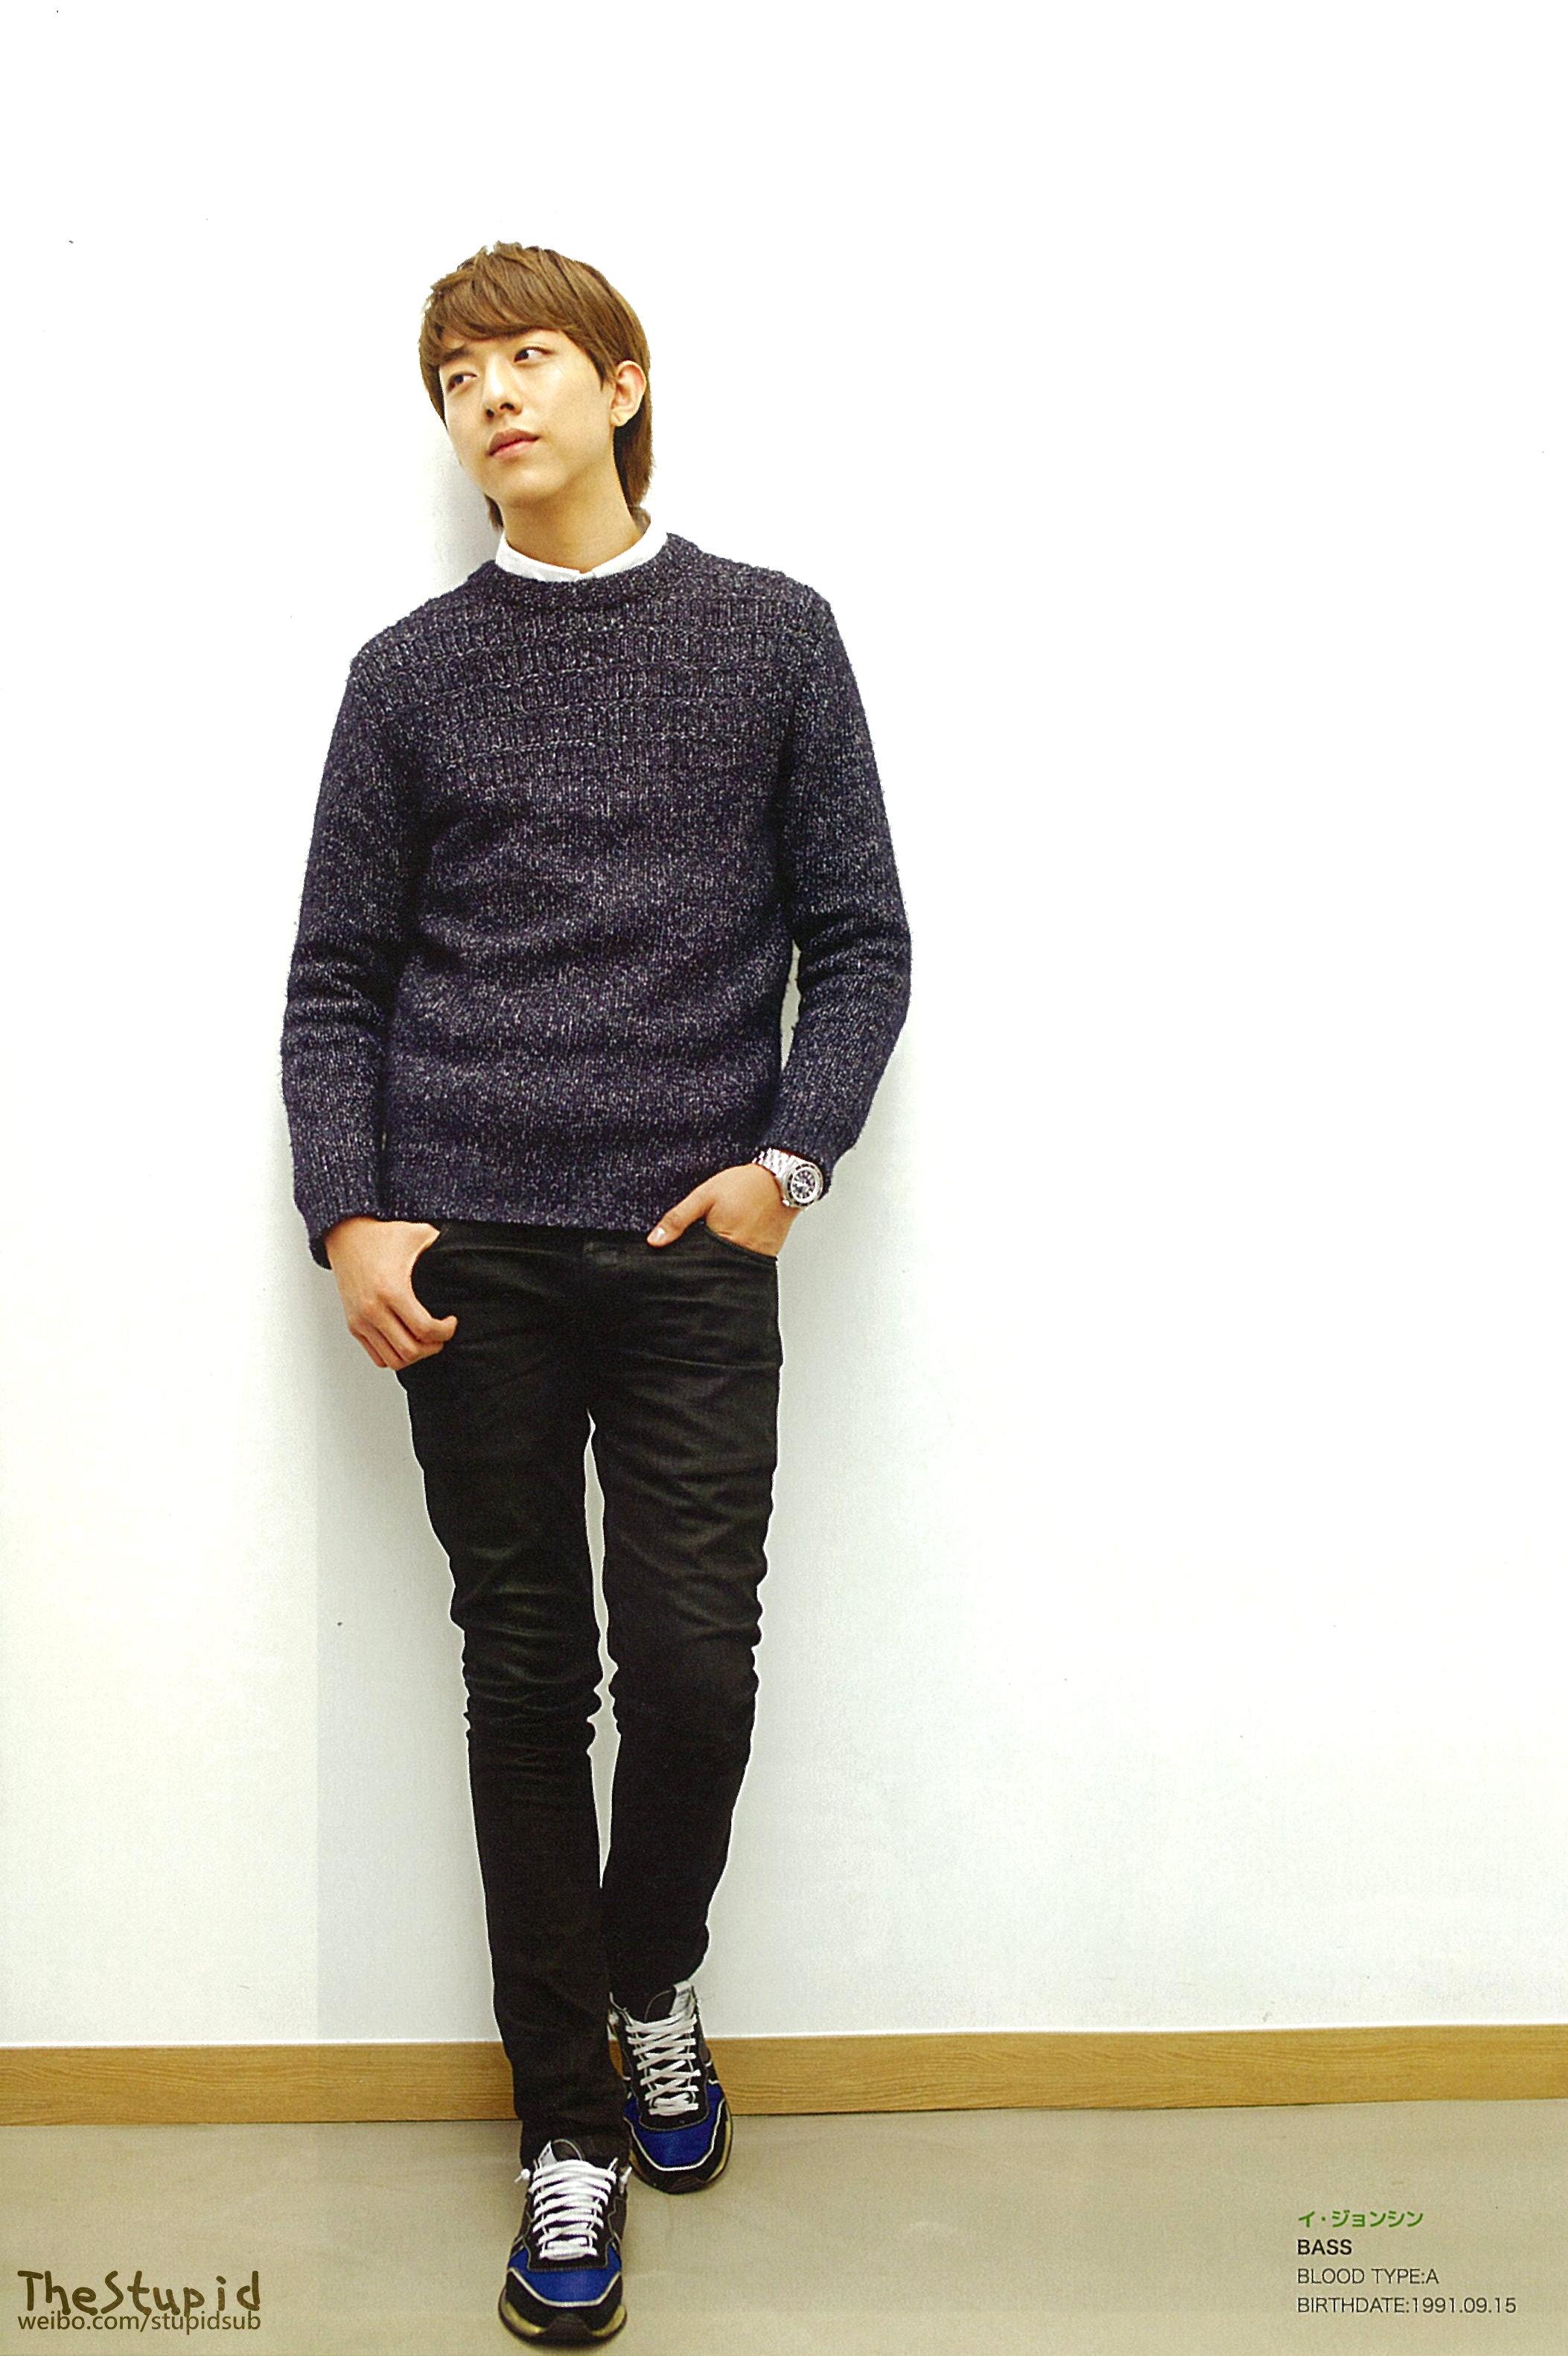 Lee Jung Shin Android IPhone Wallpaper KPOP Image Board